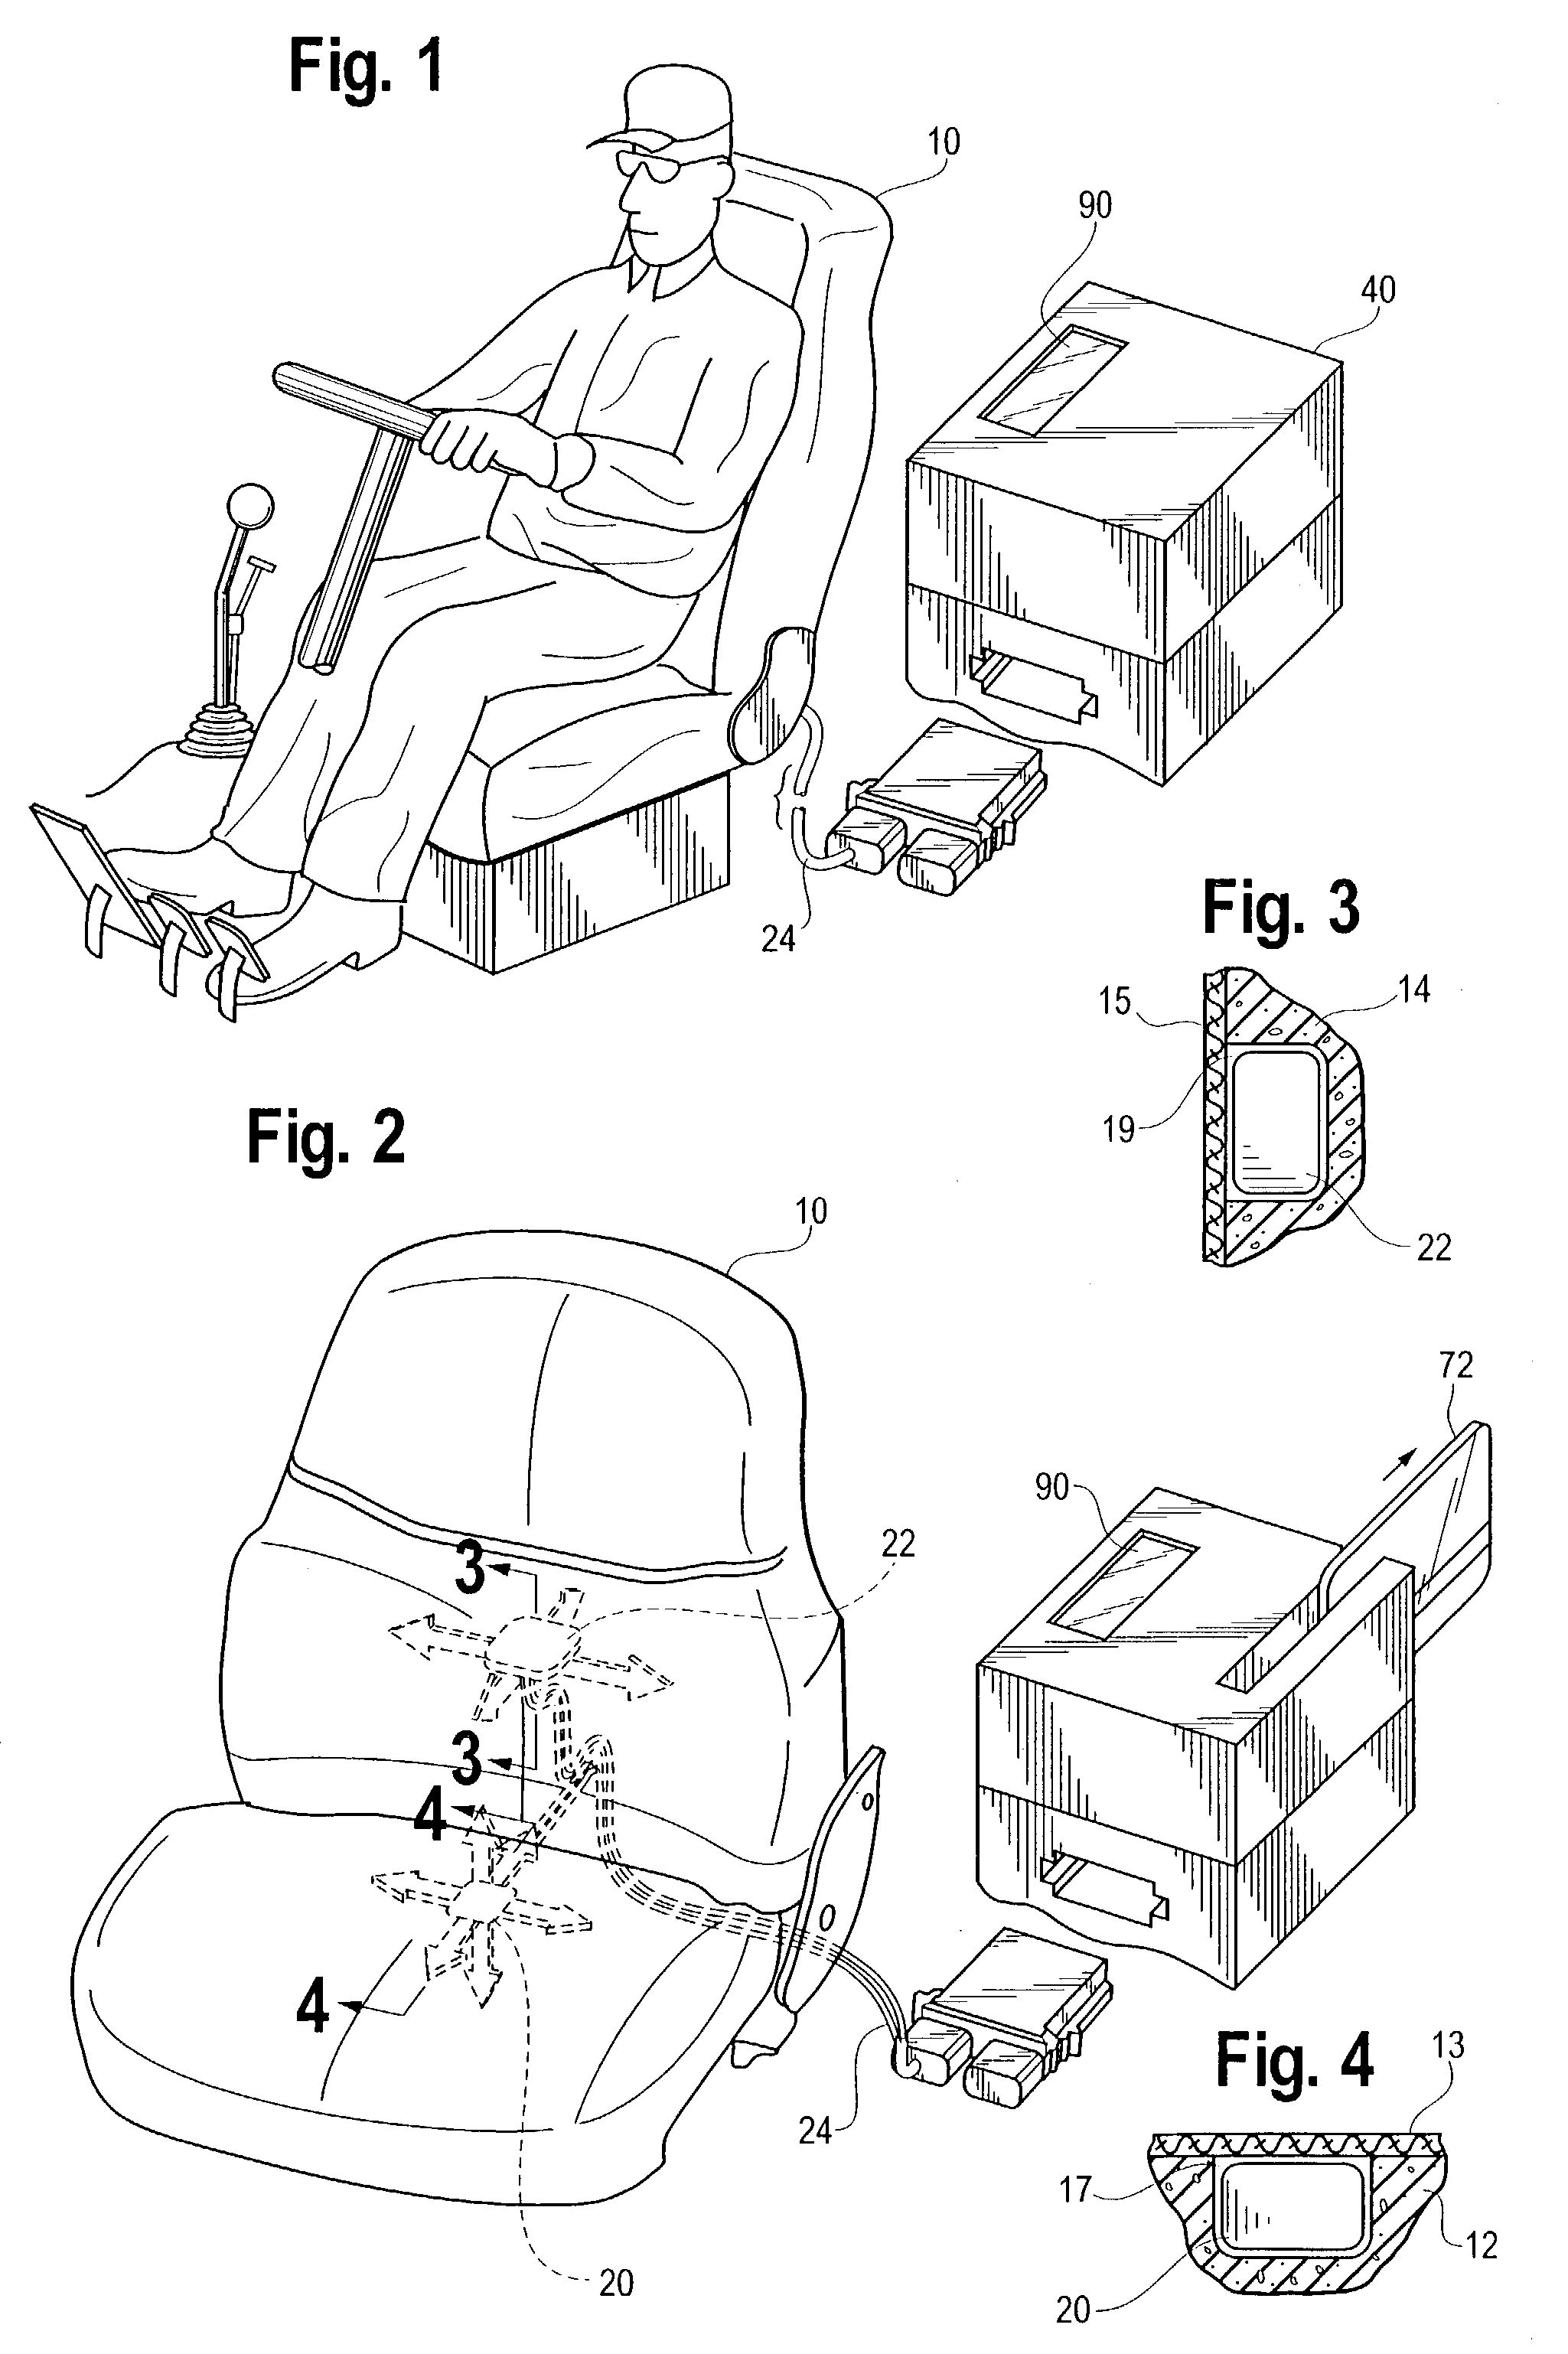 Vehicle seat with vibration monitoring ability